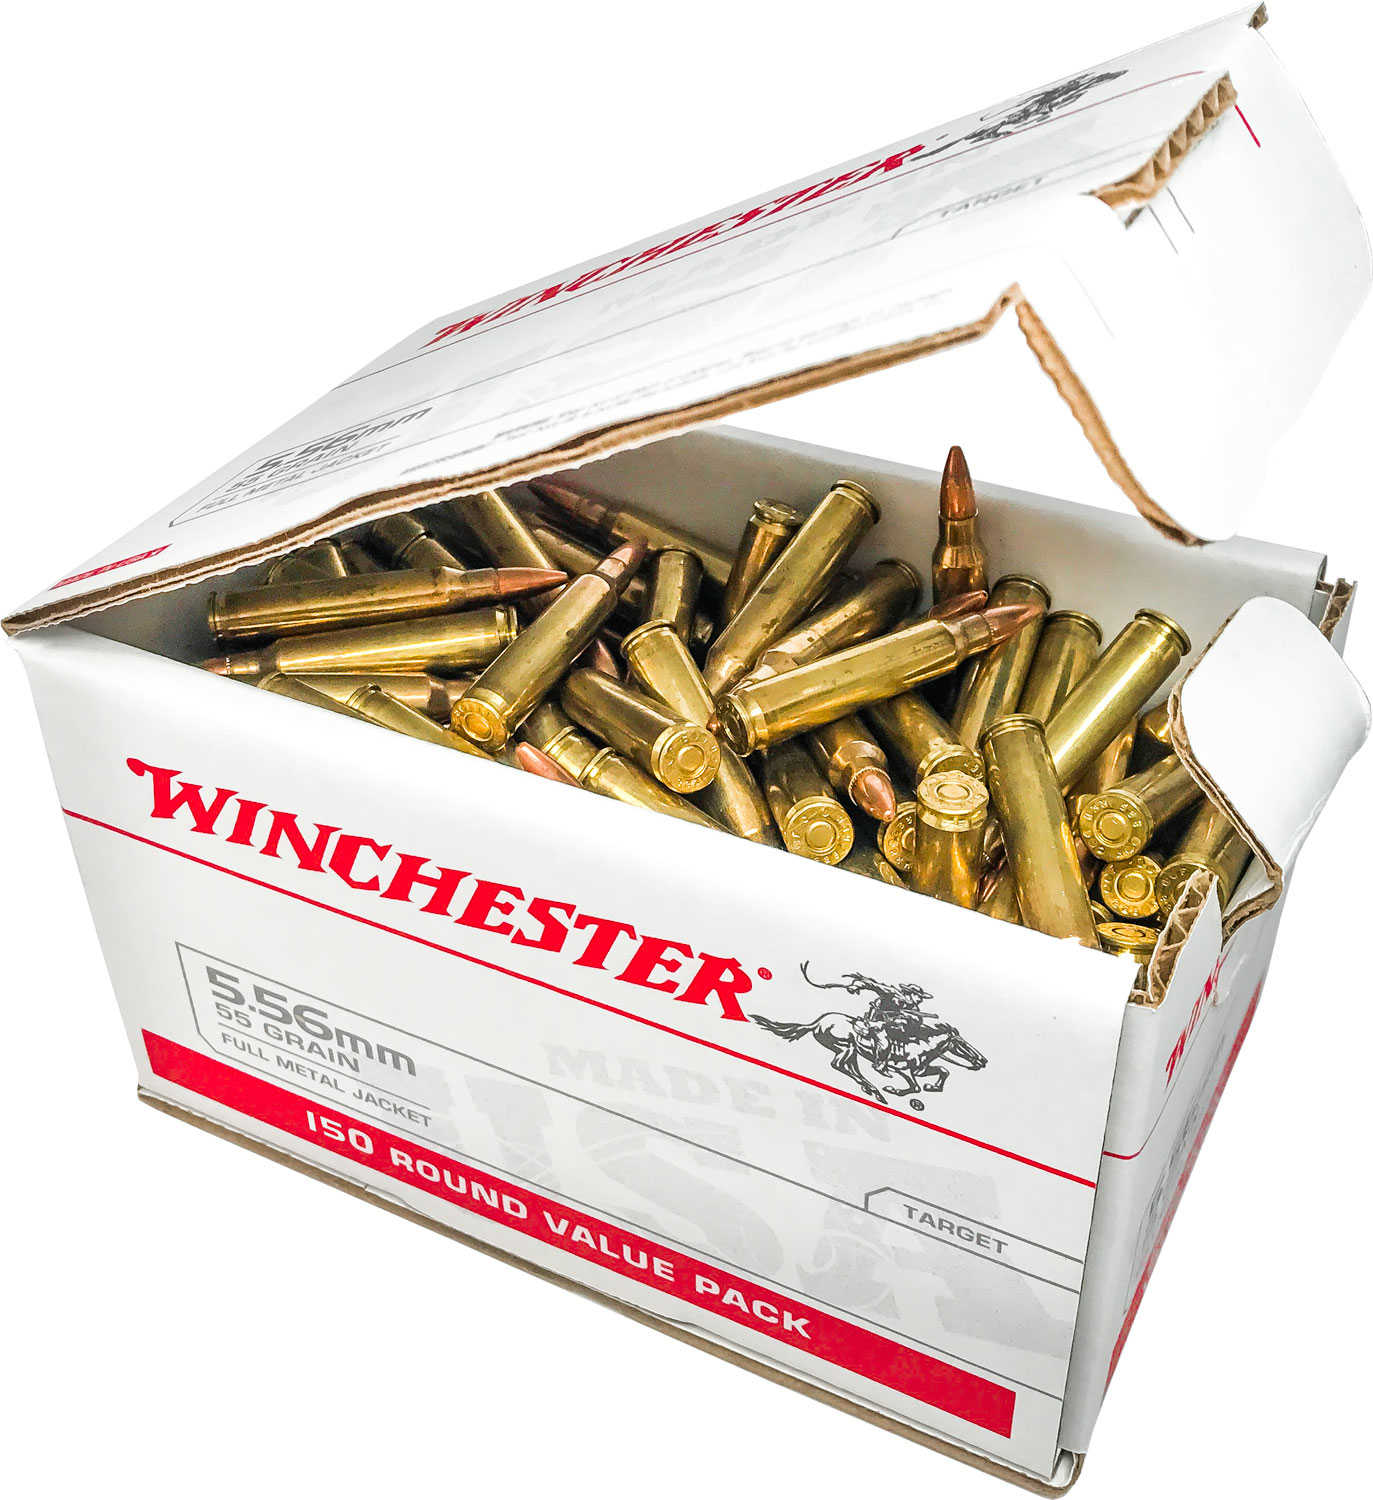 Winchester USA 5.56x45mm NATO 55 gr 3270 fps Full Metal Jacket (FMJ) Ammo 150 Round Box